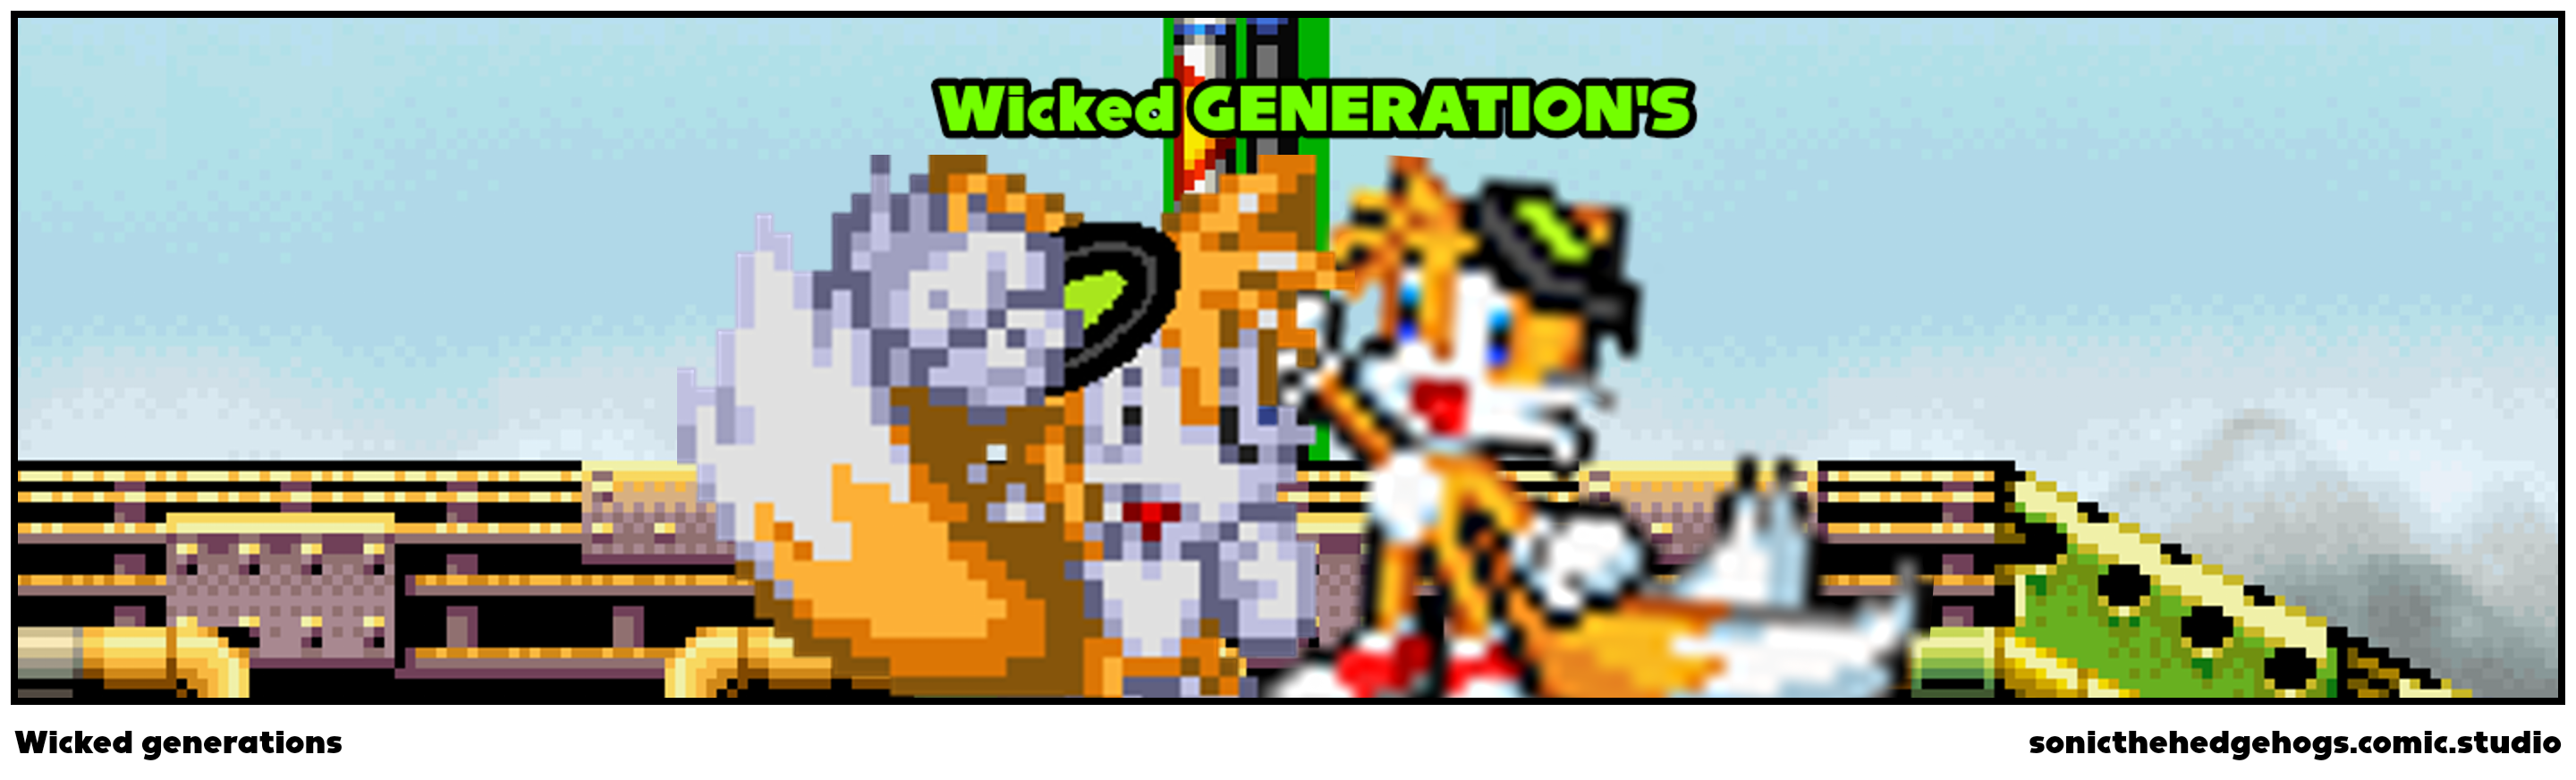 Wicked generations